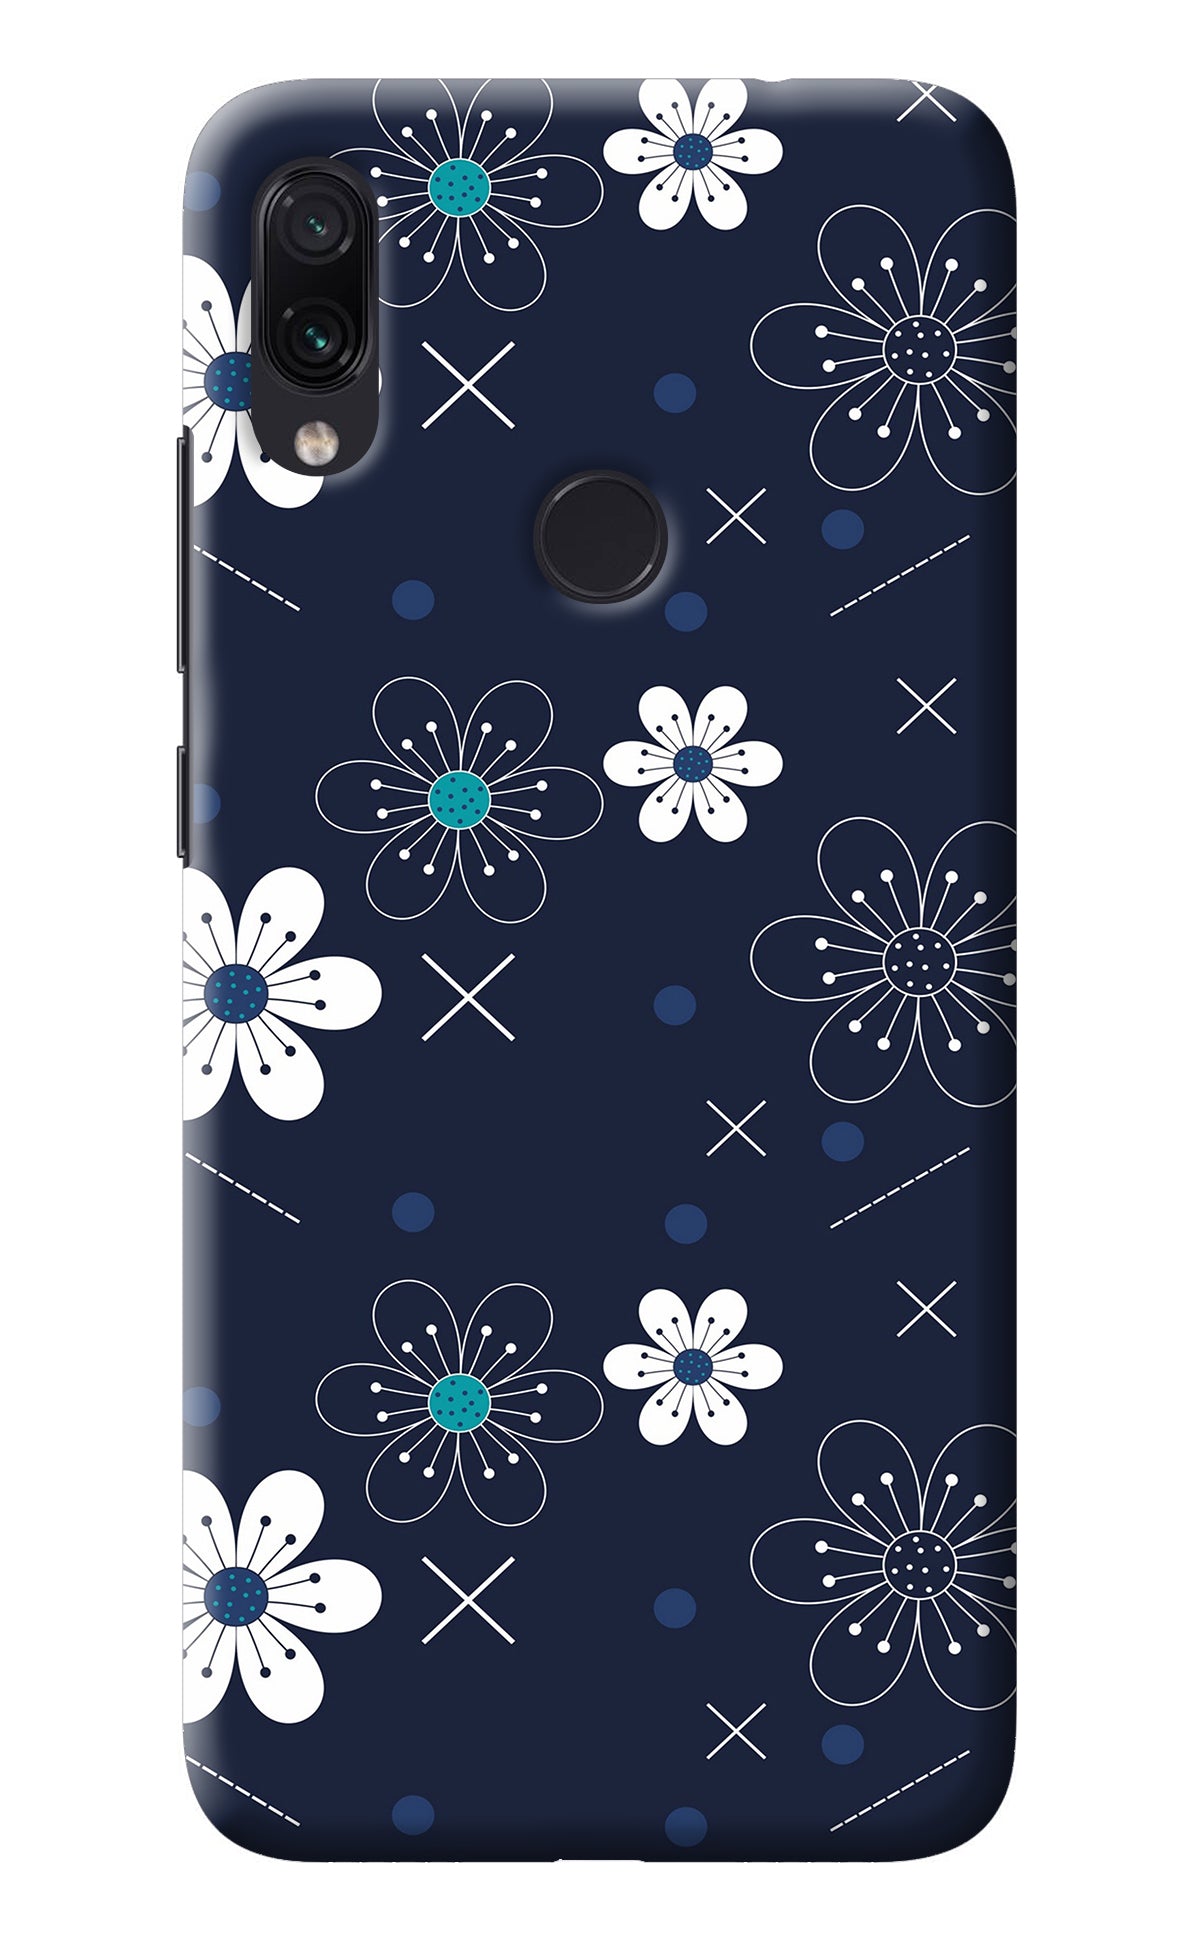 Flowers Redmi Note 7/7S/7 Pro Back Cover